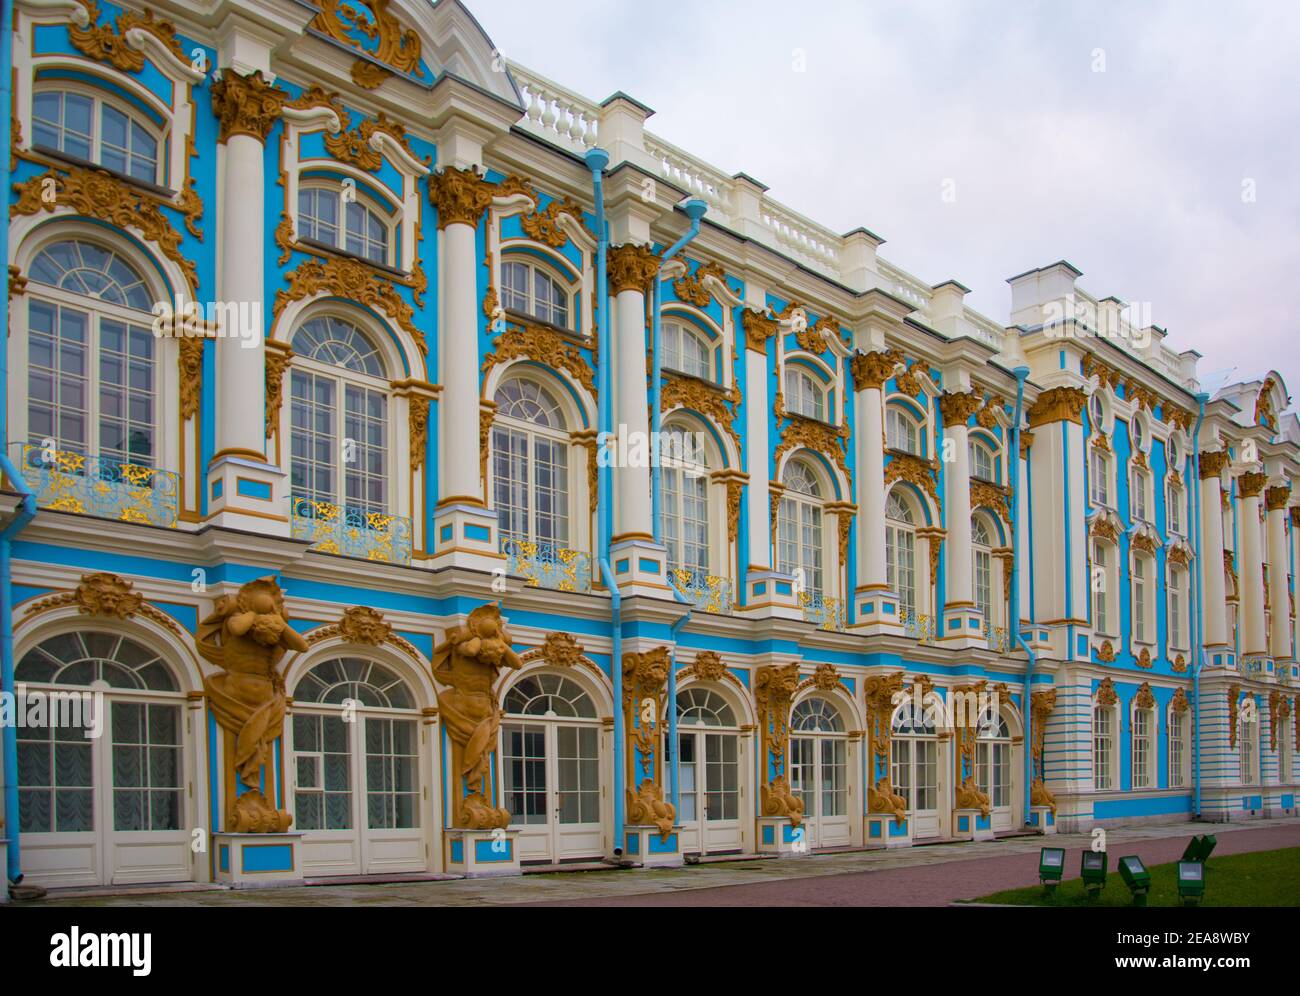 The Catherine Palace is a Rococo palace in Tsarskoye Selo south of St. Petersburg, Russia. It was the summer residence of the Russian tsars. Stock Photo